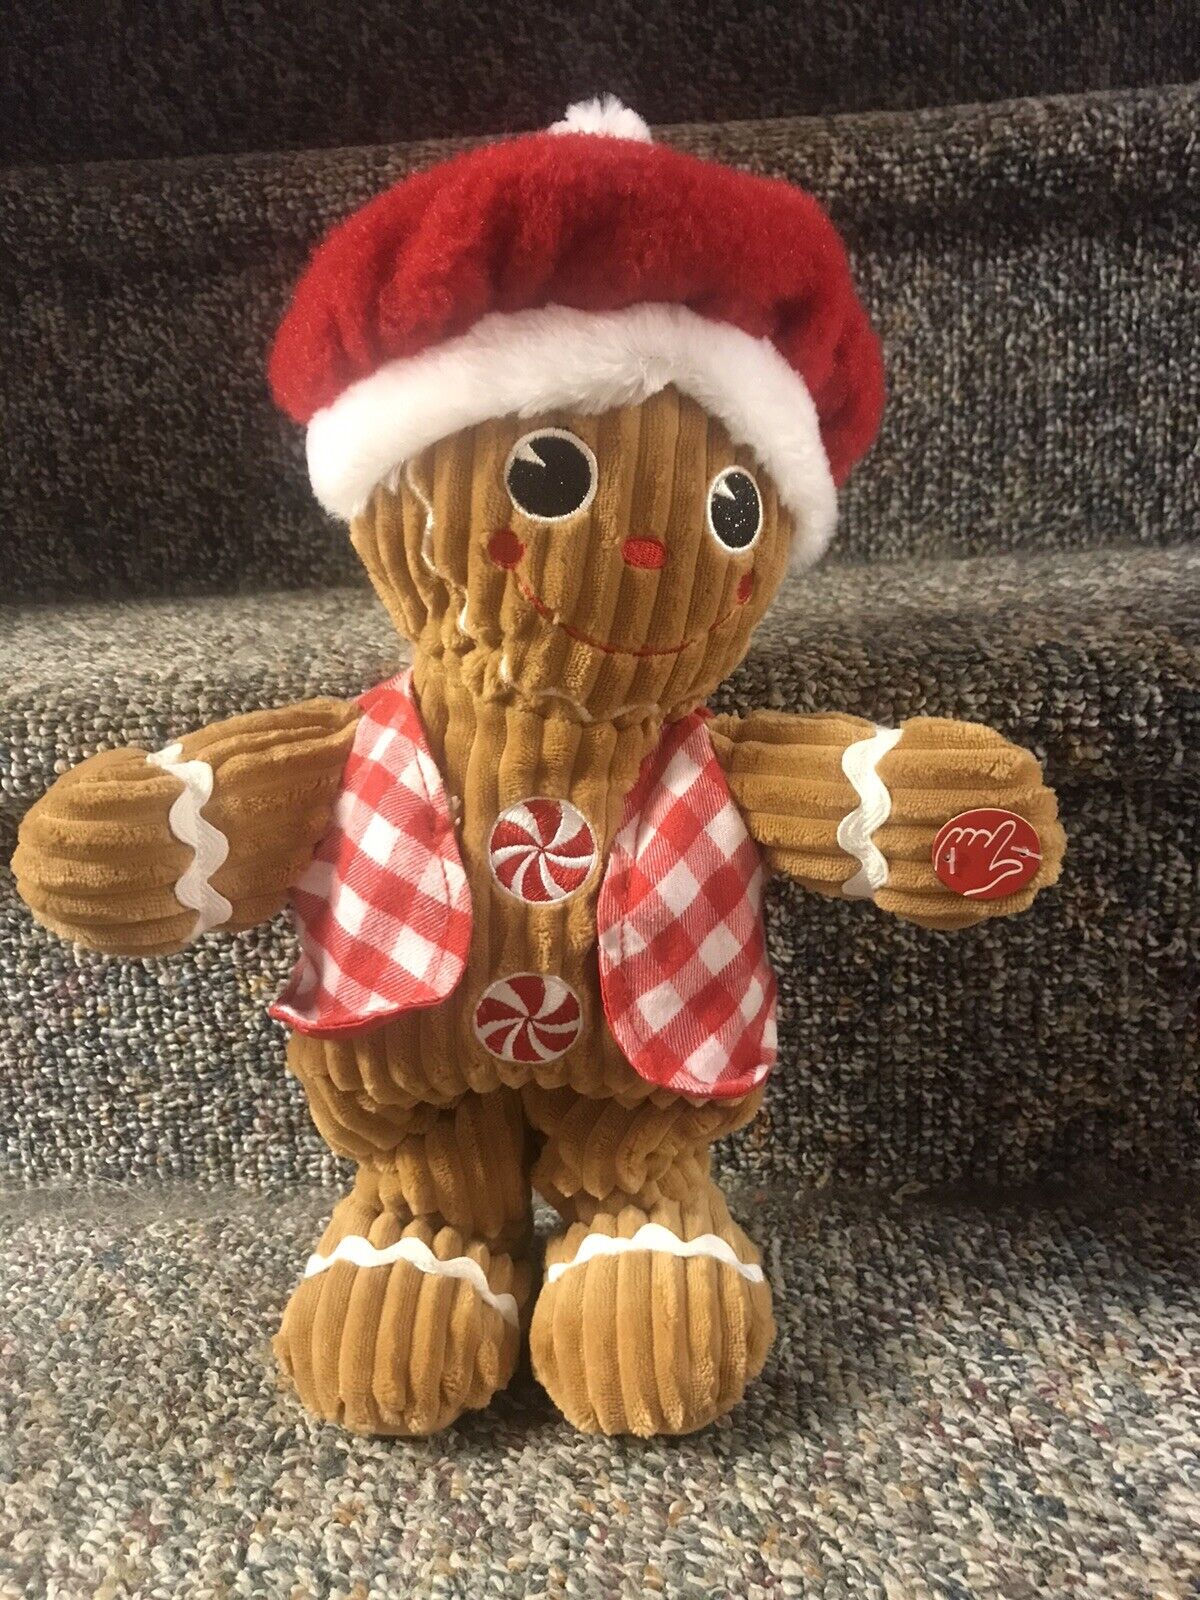 Merry Brite 13” Animated Singing Gingerbread in Santa Hat and Red Plaid Vest